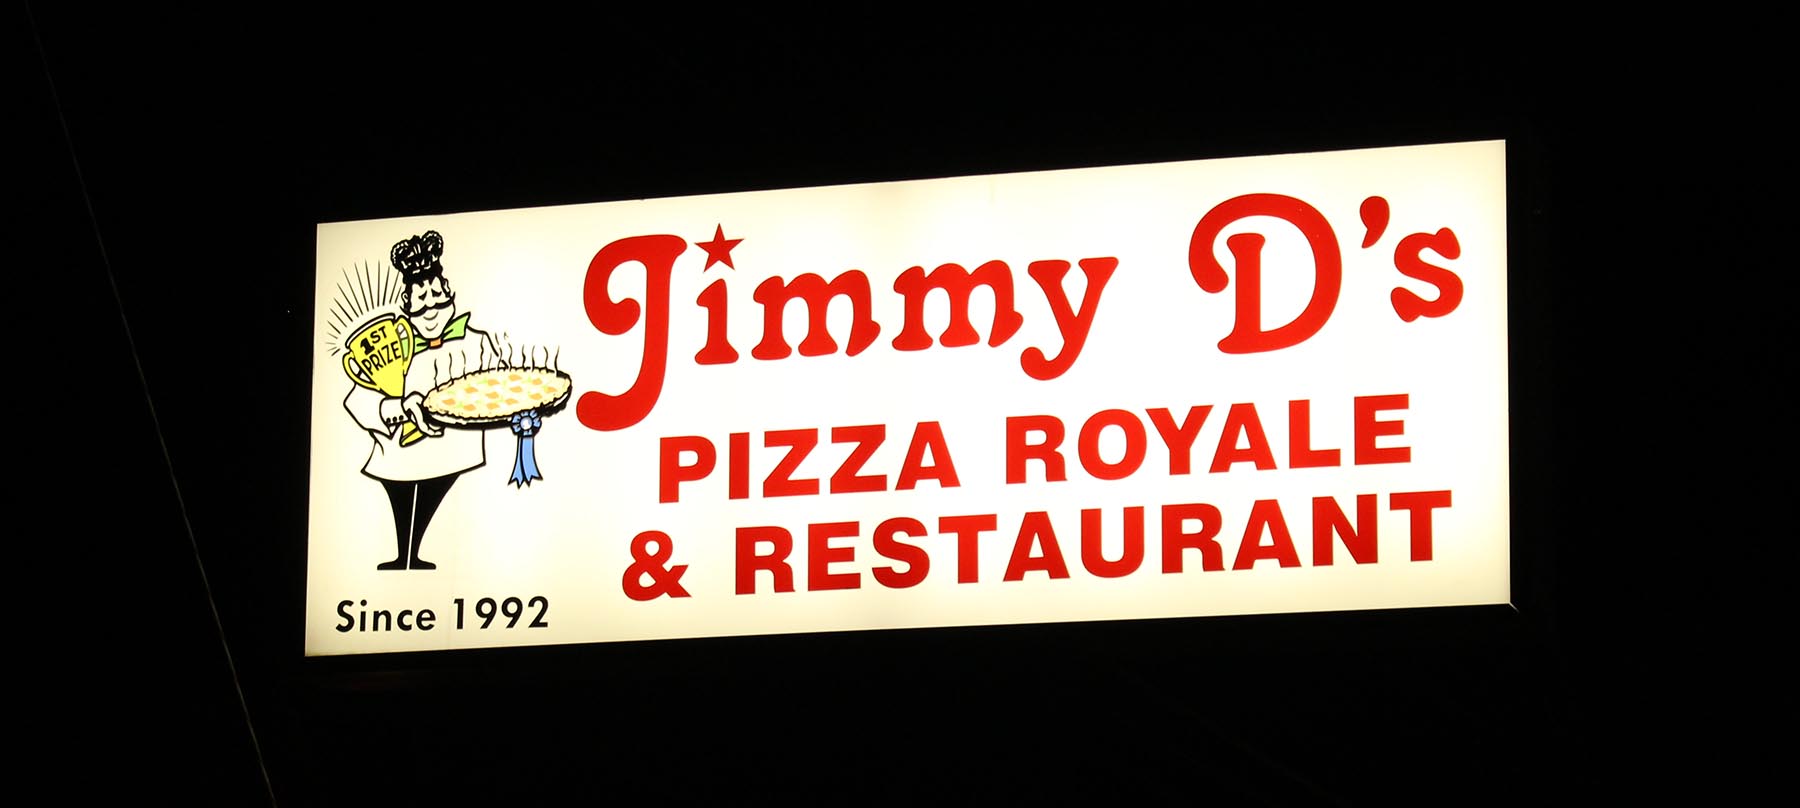 Pizza Restaurant Diner Food Near Me Jimmy Ds Pizza Royale